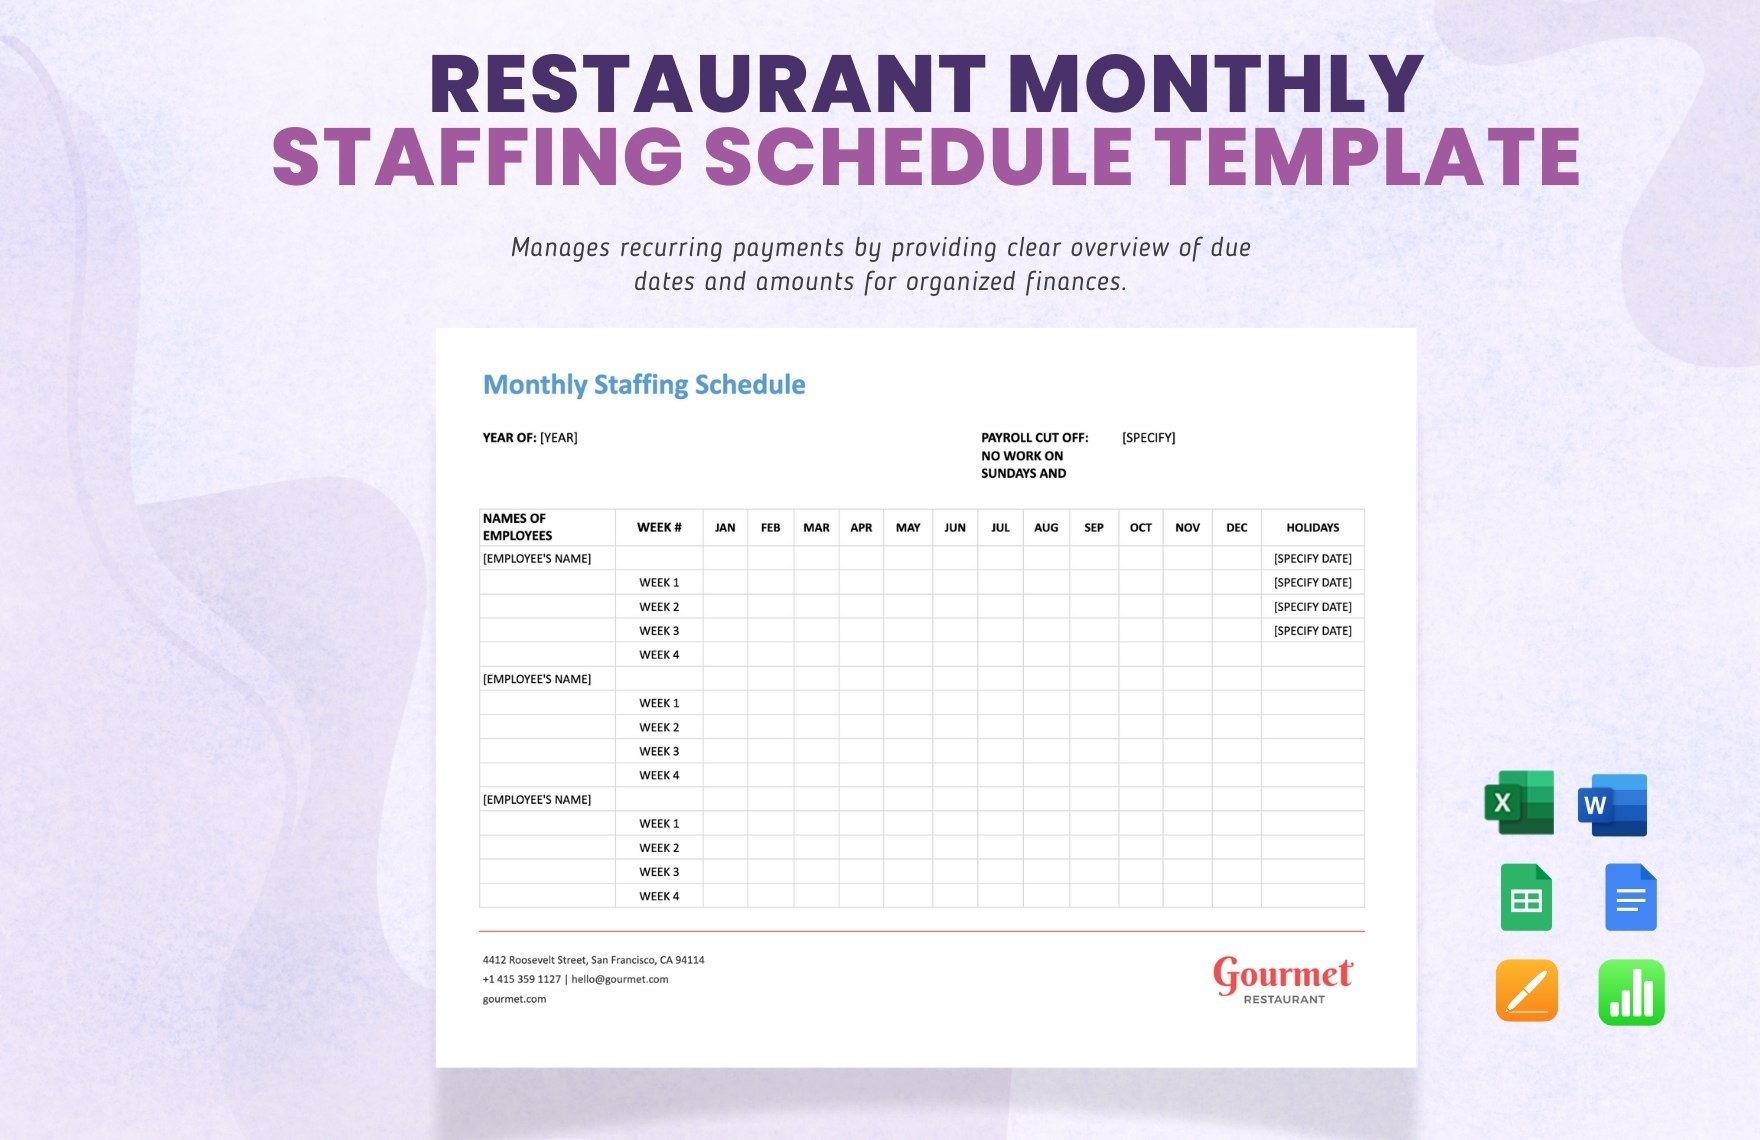 Restaurant Monthly Staffing Schedule Template in Word, Google Docs, Excel, Google Sheets, Apple Pages, Apple Numbers